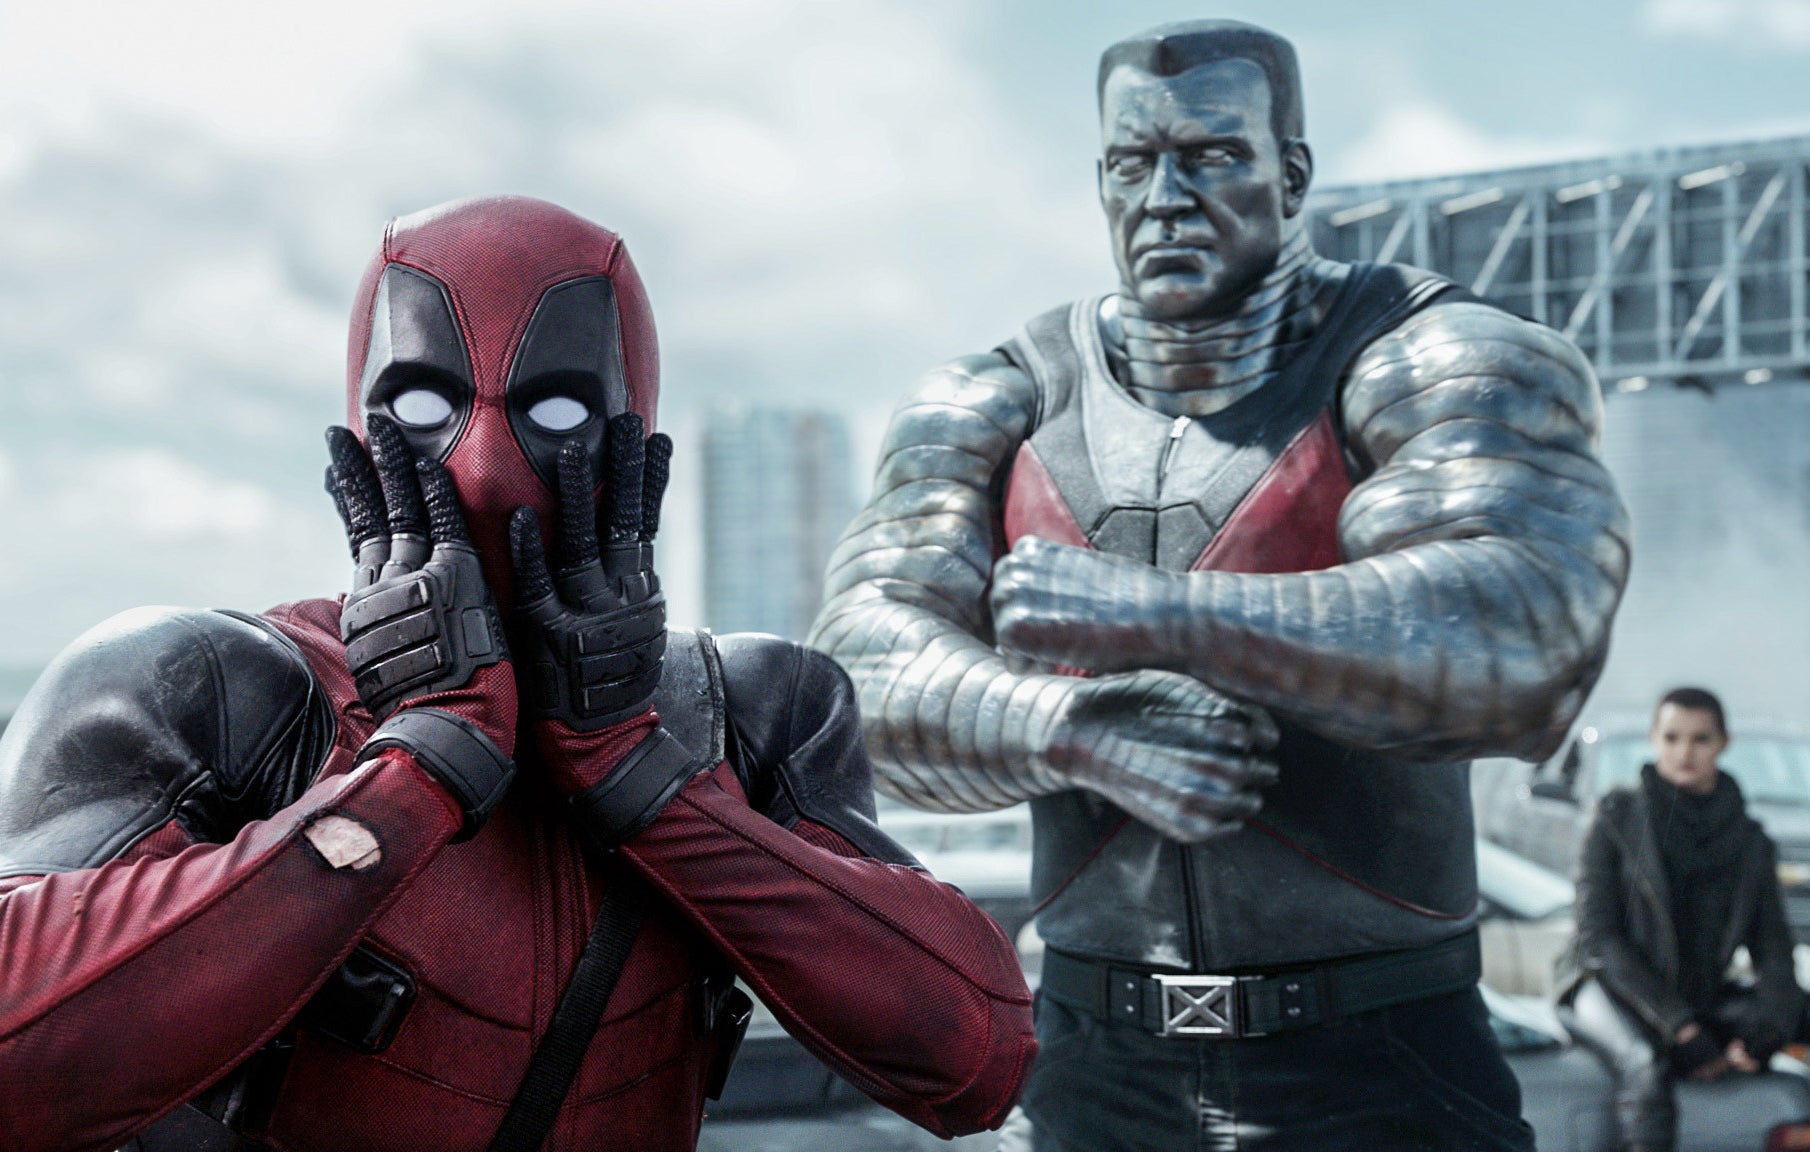 A shocked Deadpool and Colossus